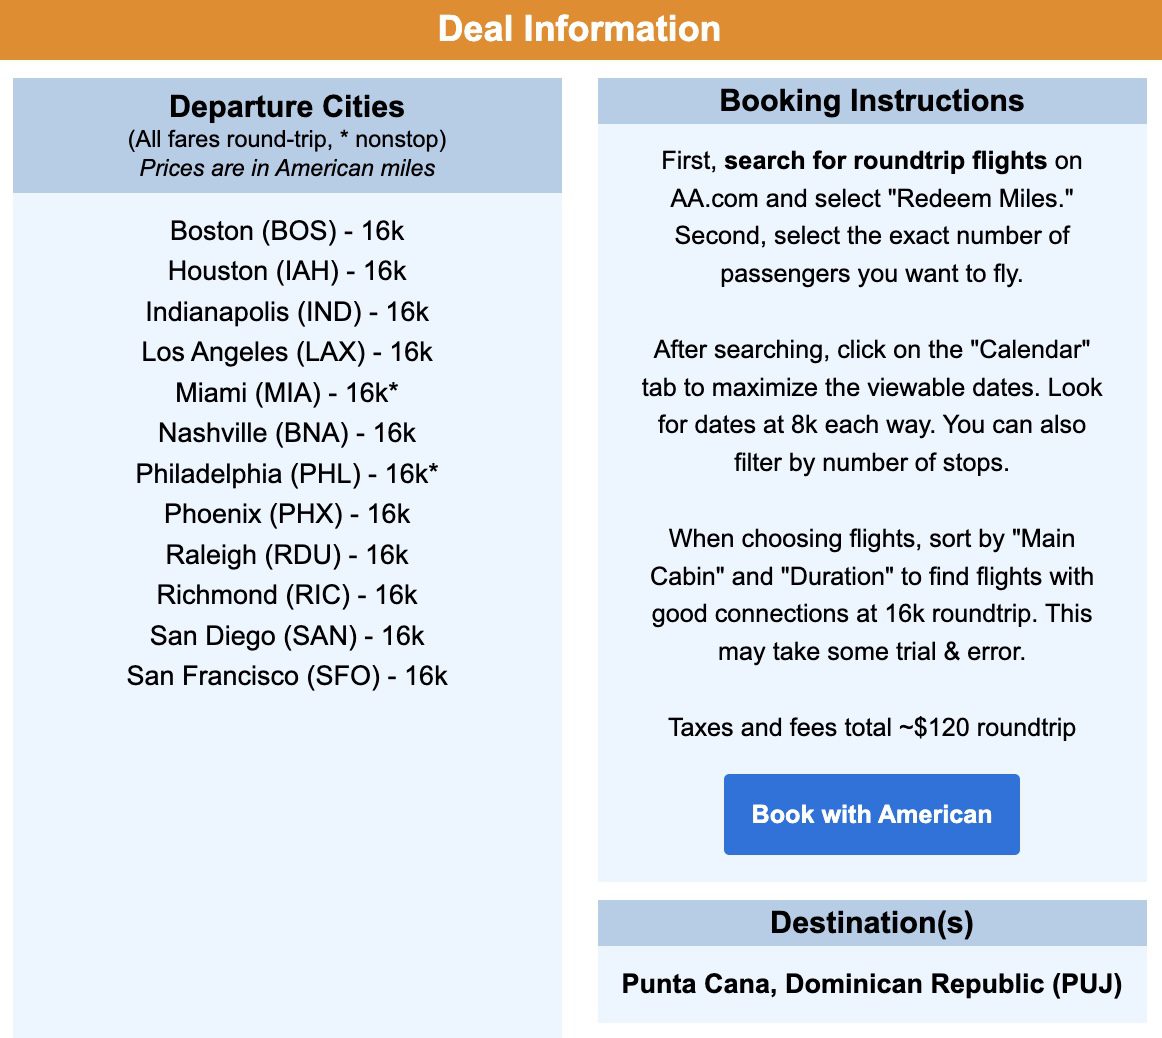 Punta Cana American Airlines flight deal